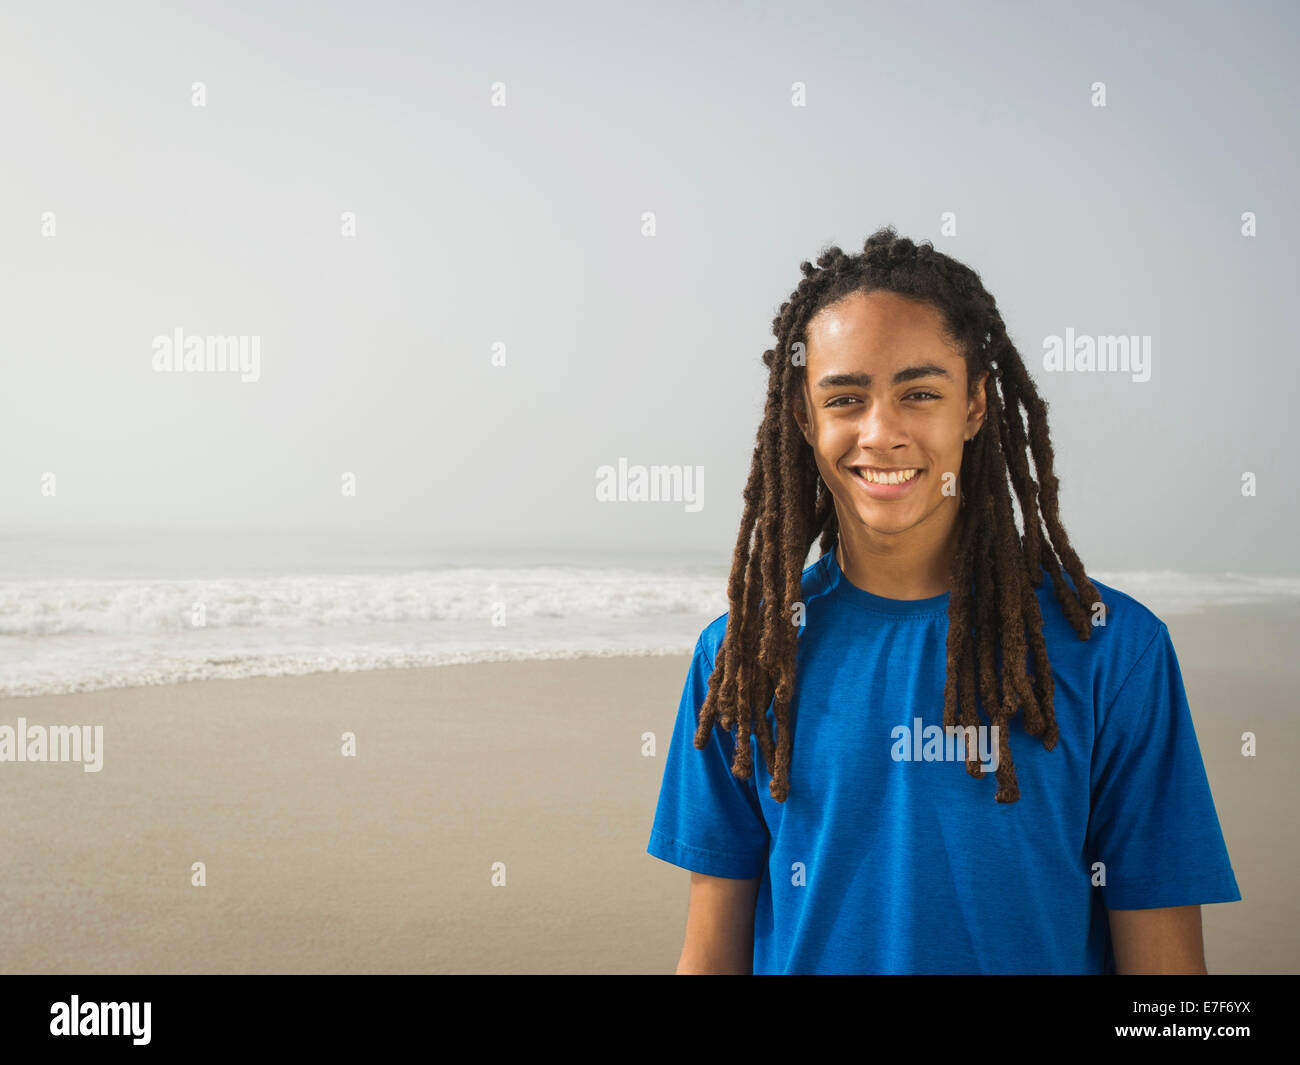 Black woman smiling on beach Banque D'Images